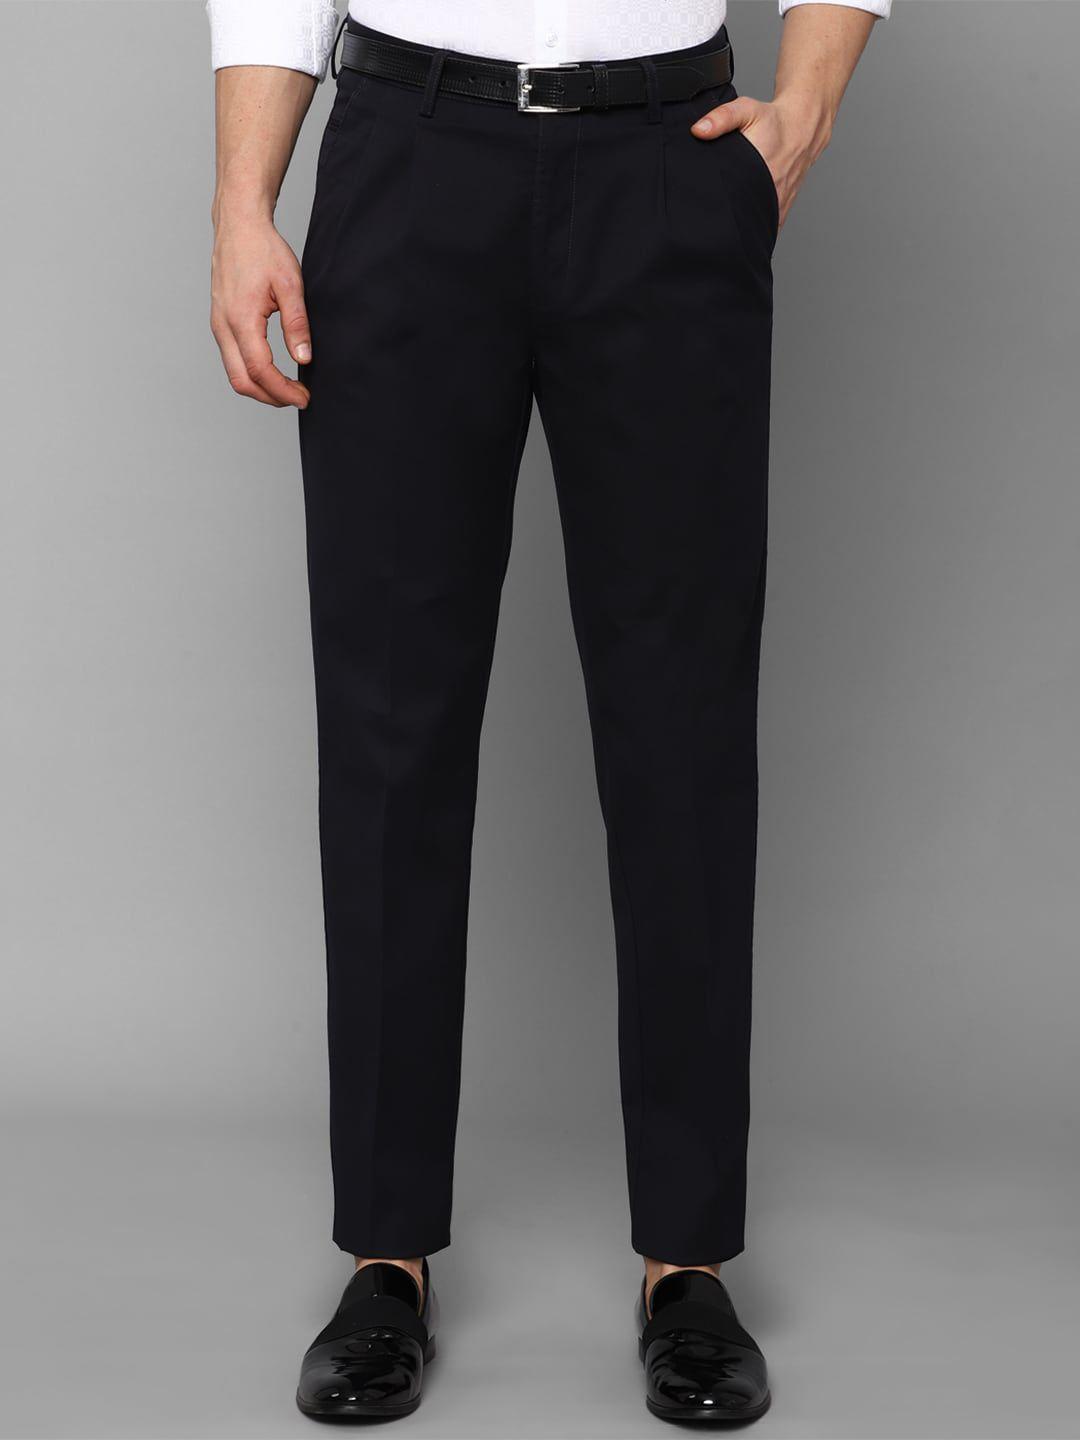 allen solly mid-rise solid regular fit formal trouser